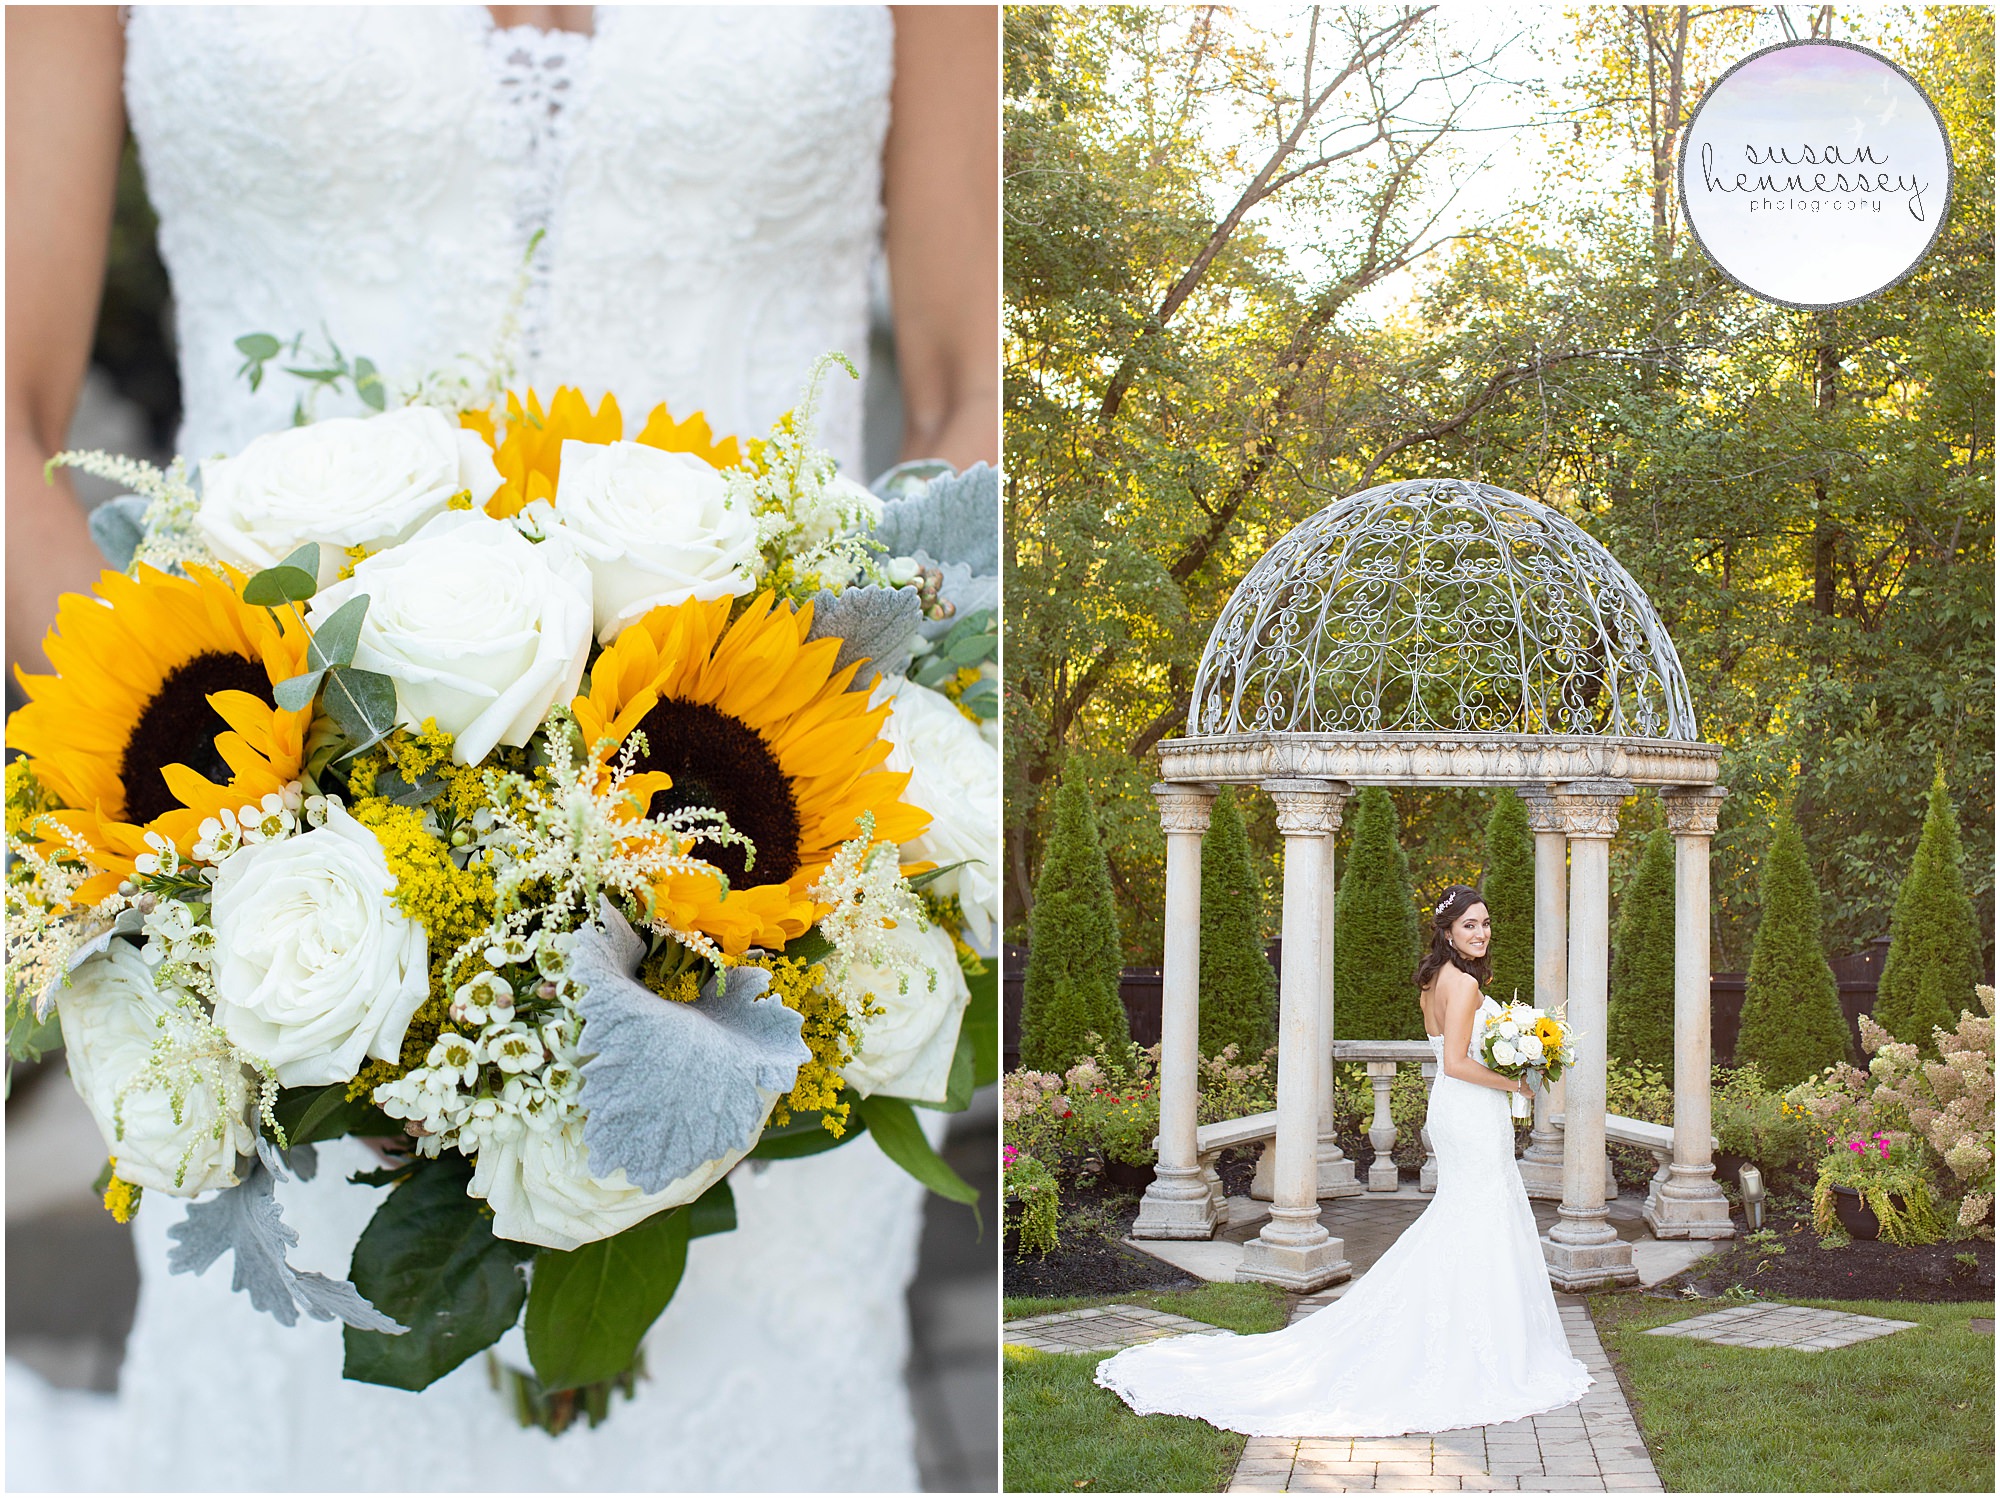 Bridal portraits with sunflower and white rose bouquet.